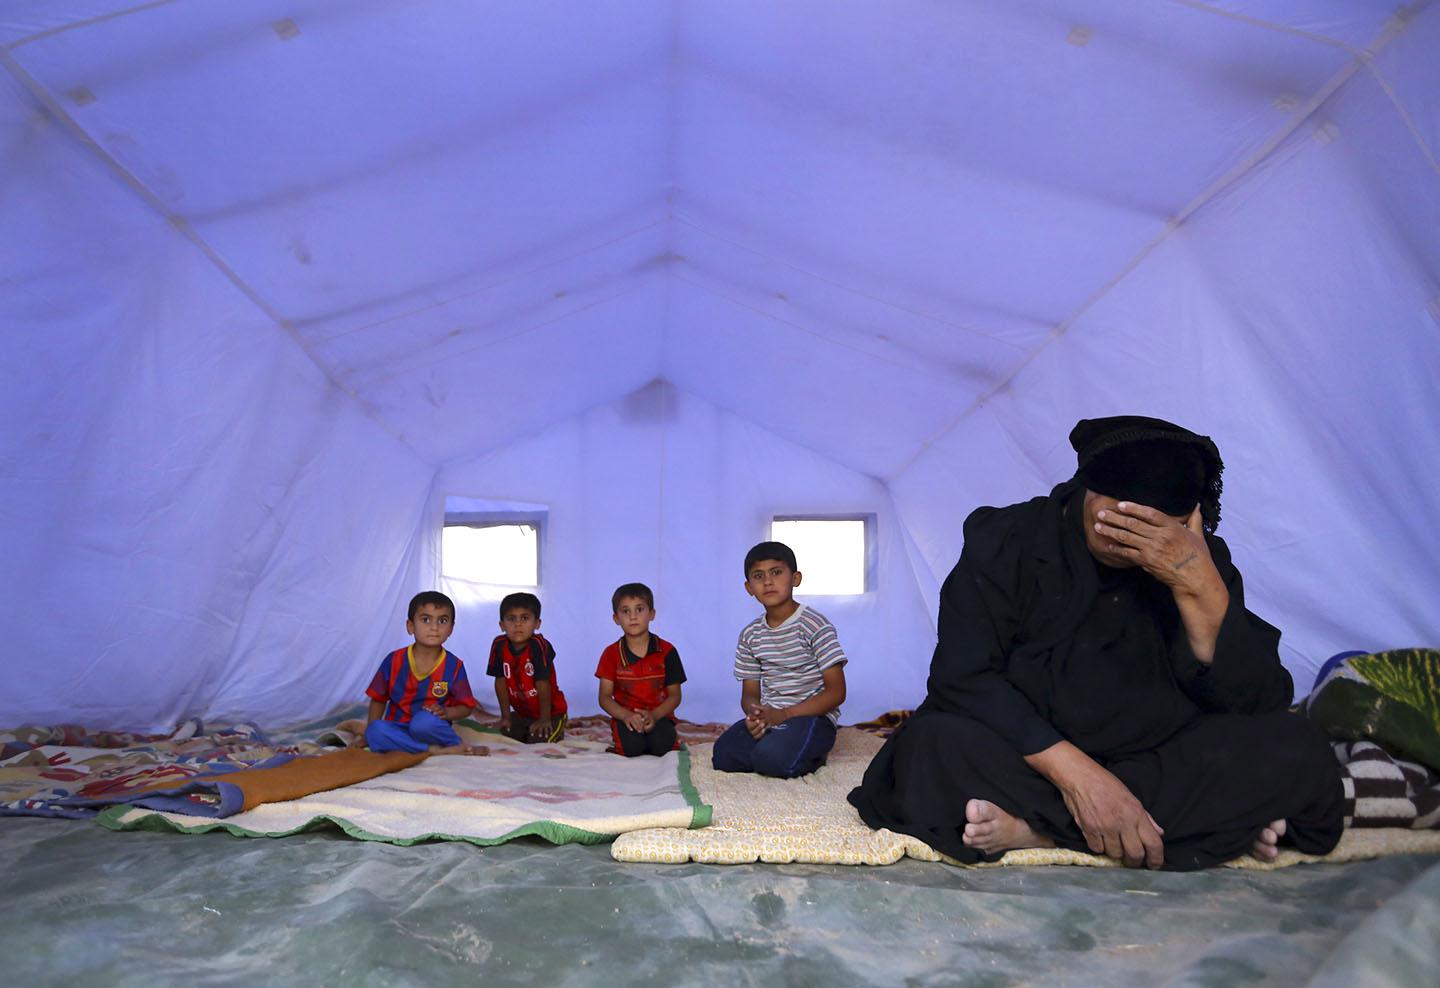 A family, who fled from the violence in Mosul, sits inside a tent at a camp on the outskirts of Erbil in Iraq's Kurdistan region, June 12, 2014. 